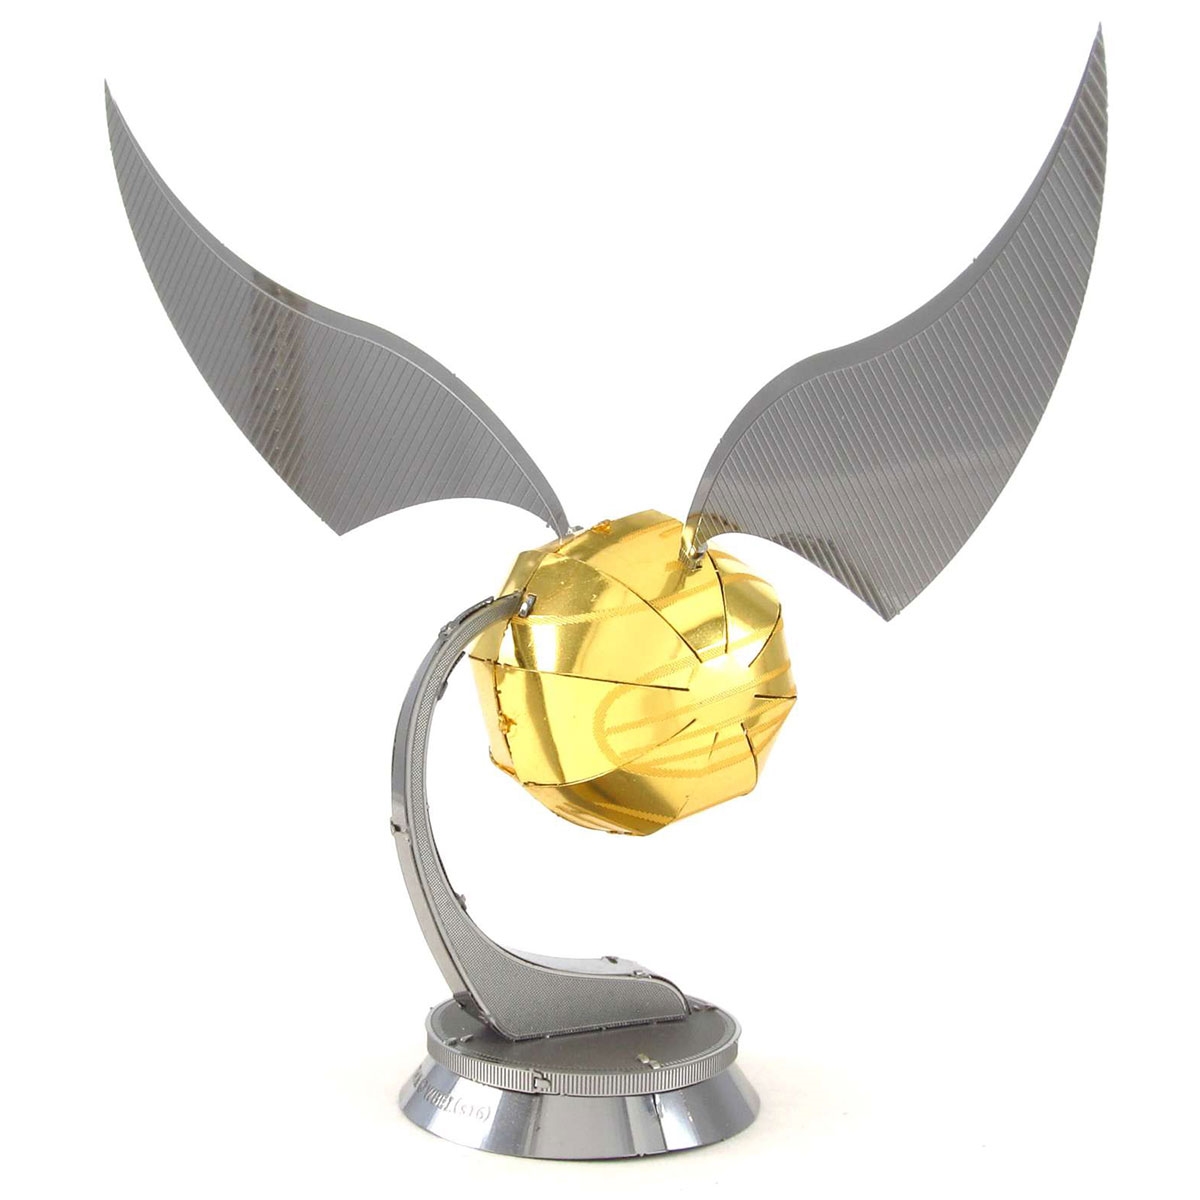 Officially Licensed Harry Potter Golden Snitch Cast Metal Music